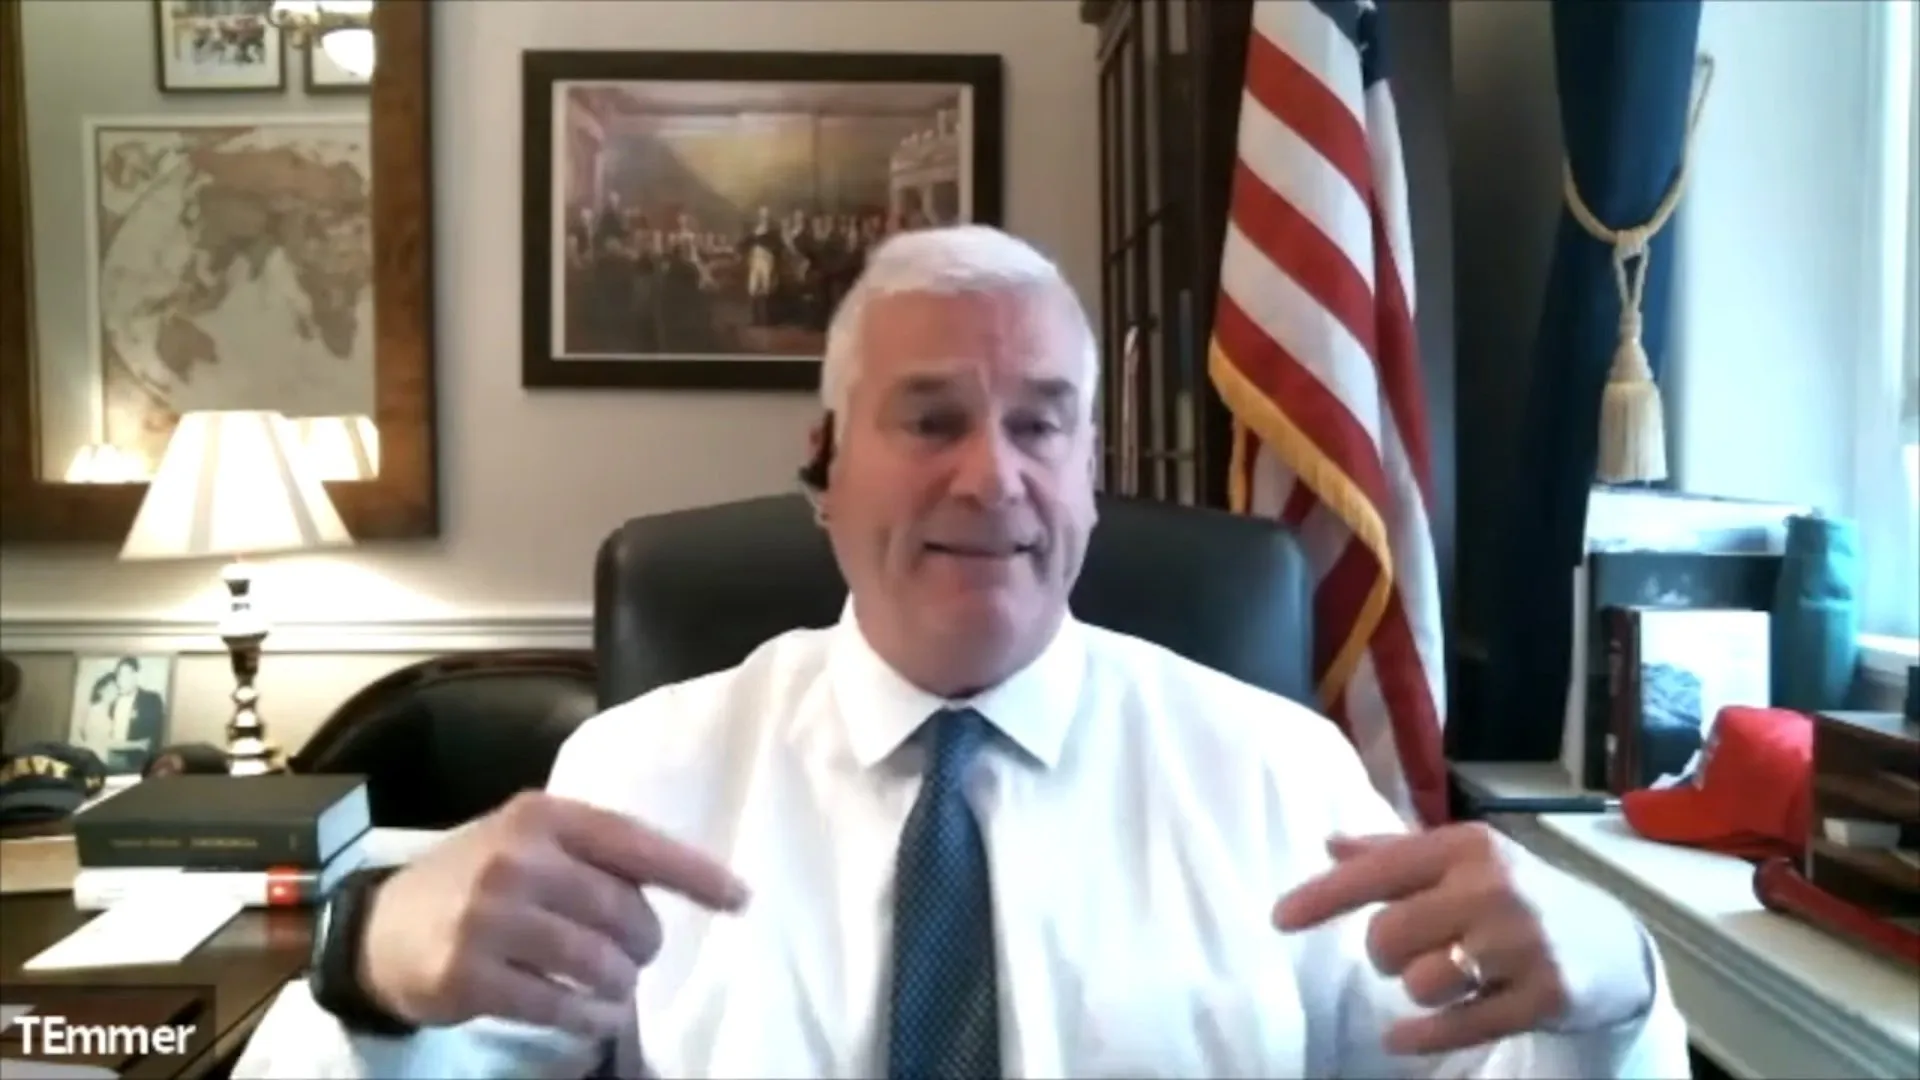 "The greatest gain is through the greatest risk," says Tom Emmer. Image: YouTube.